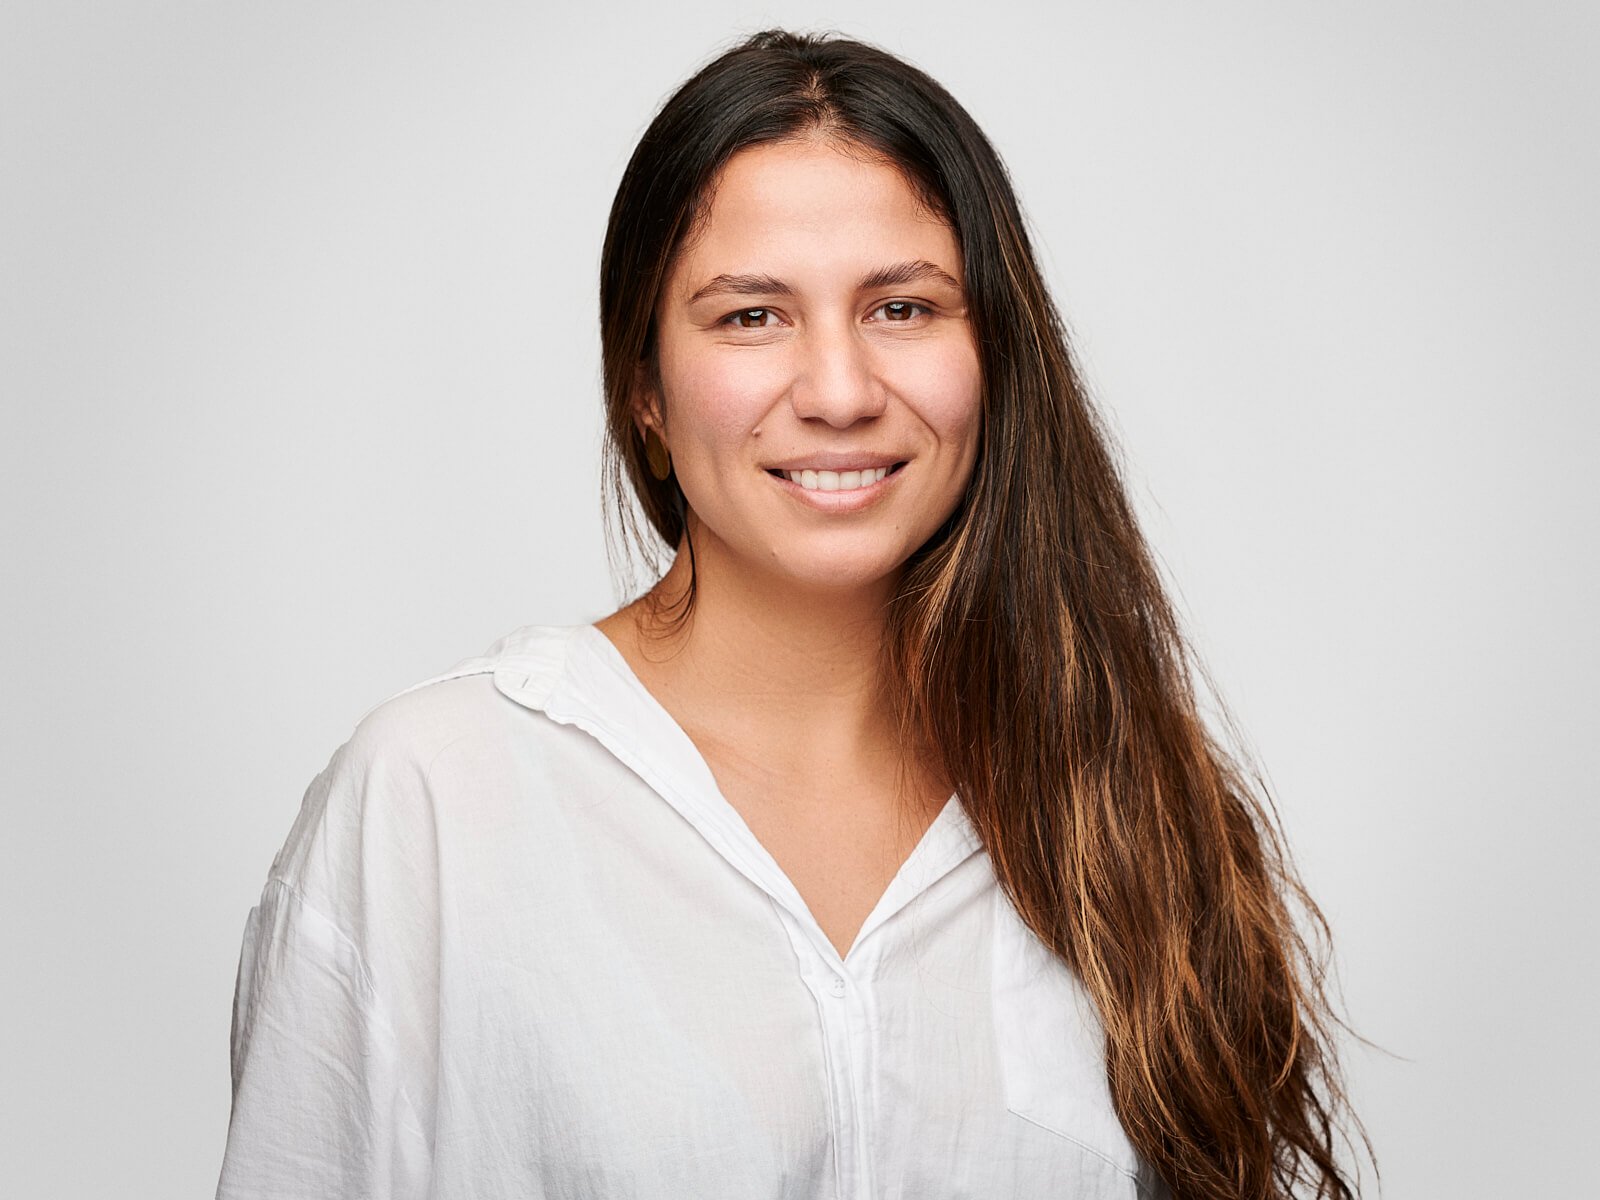 Team headshot of simling woman with long dark hair and a white shirt